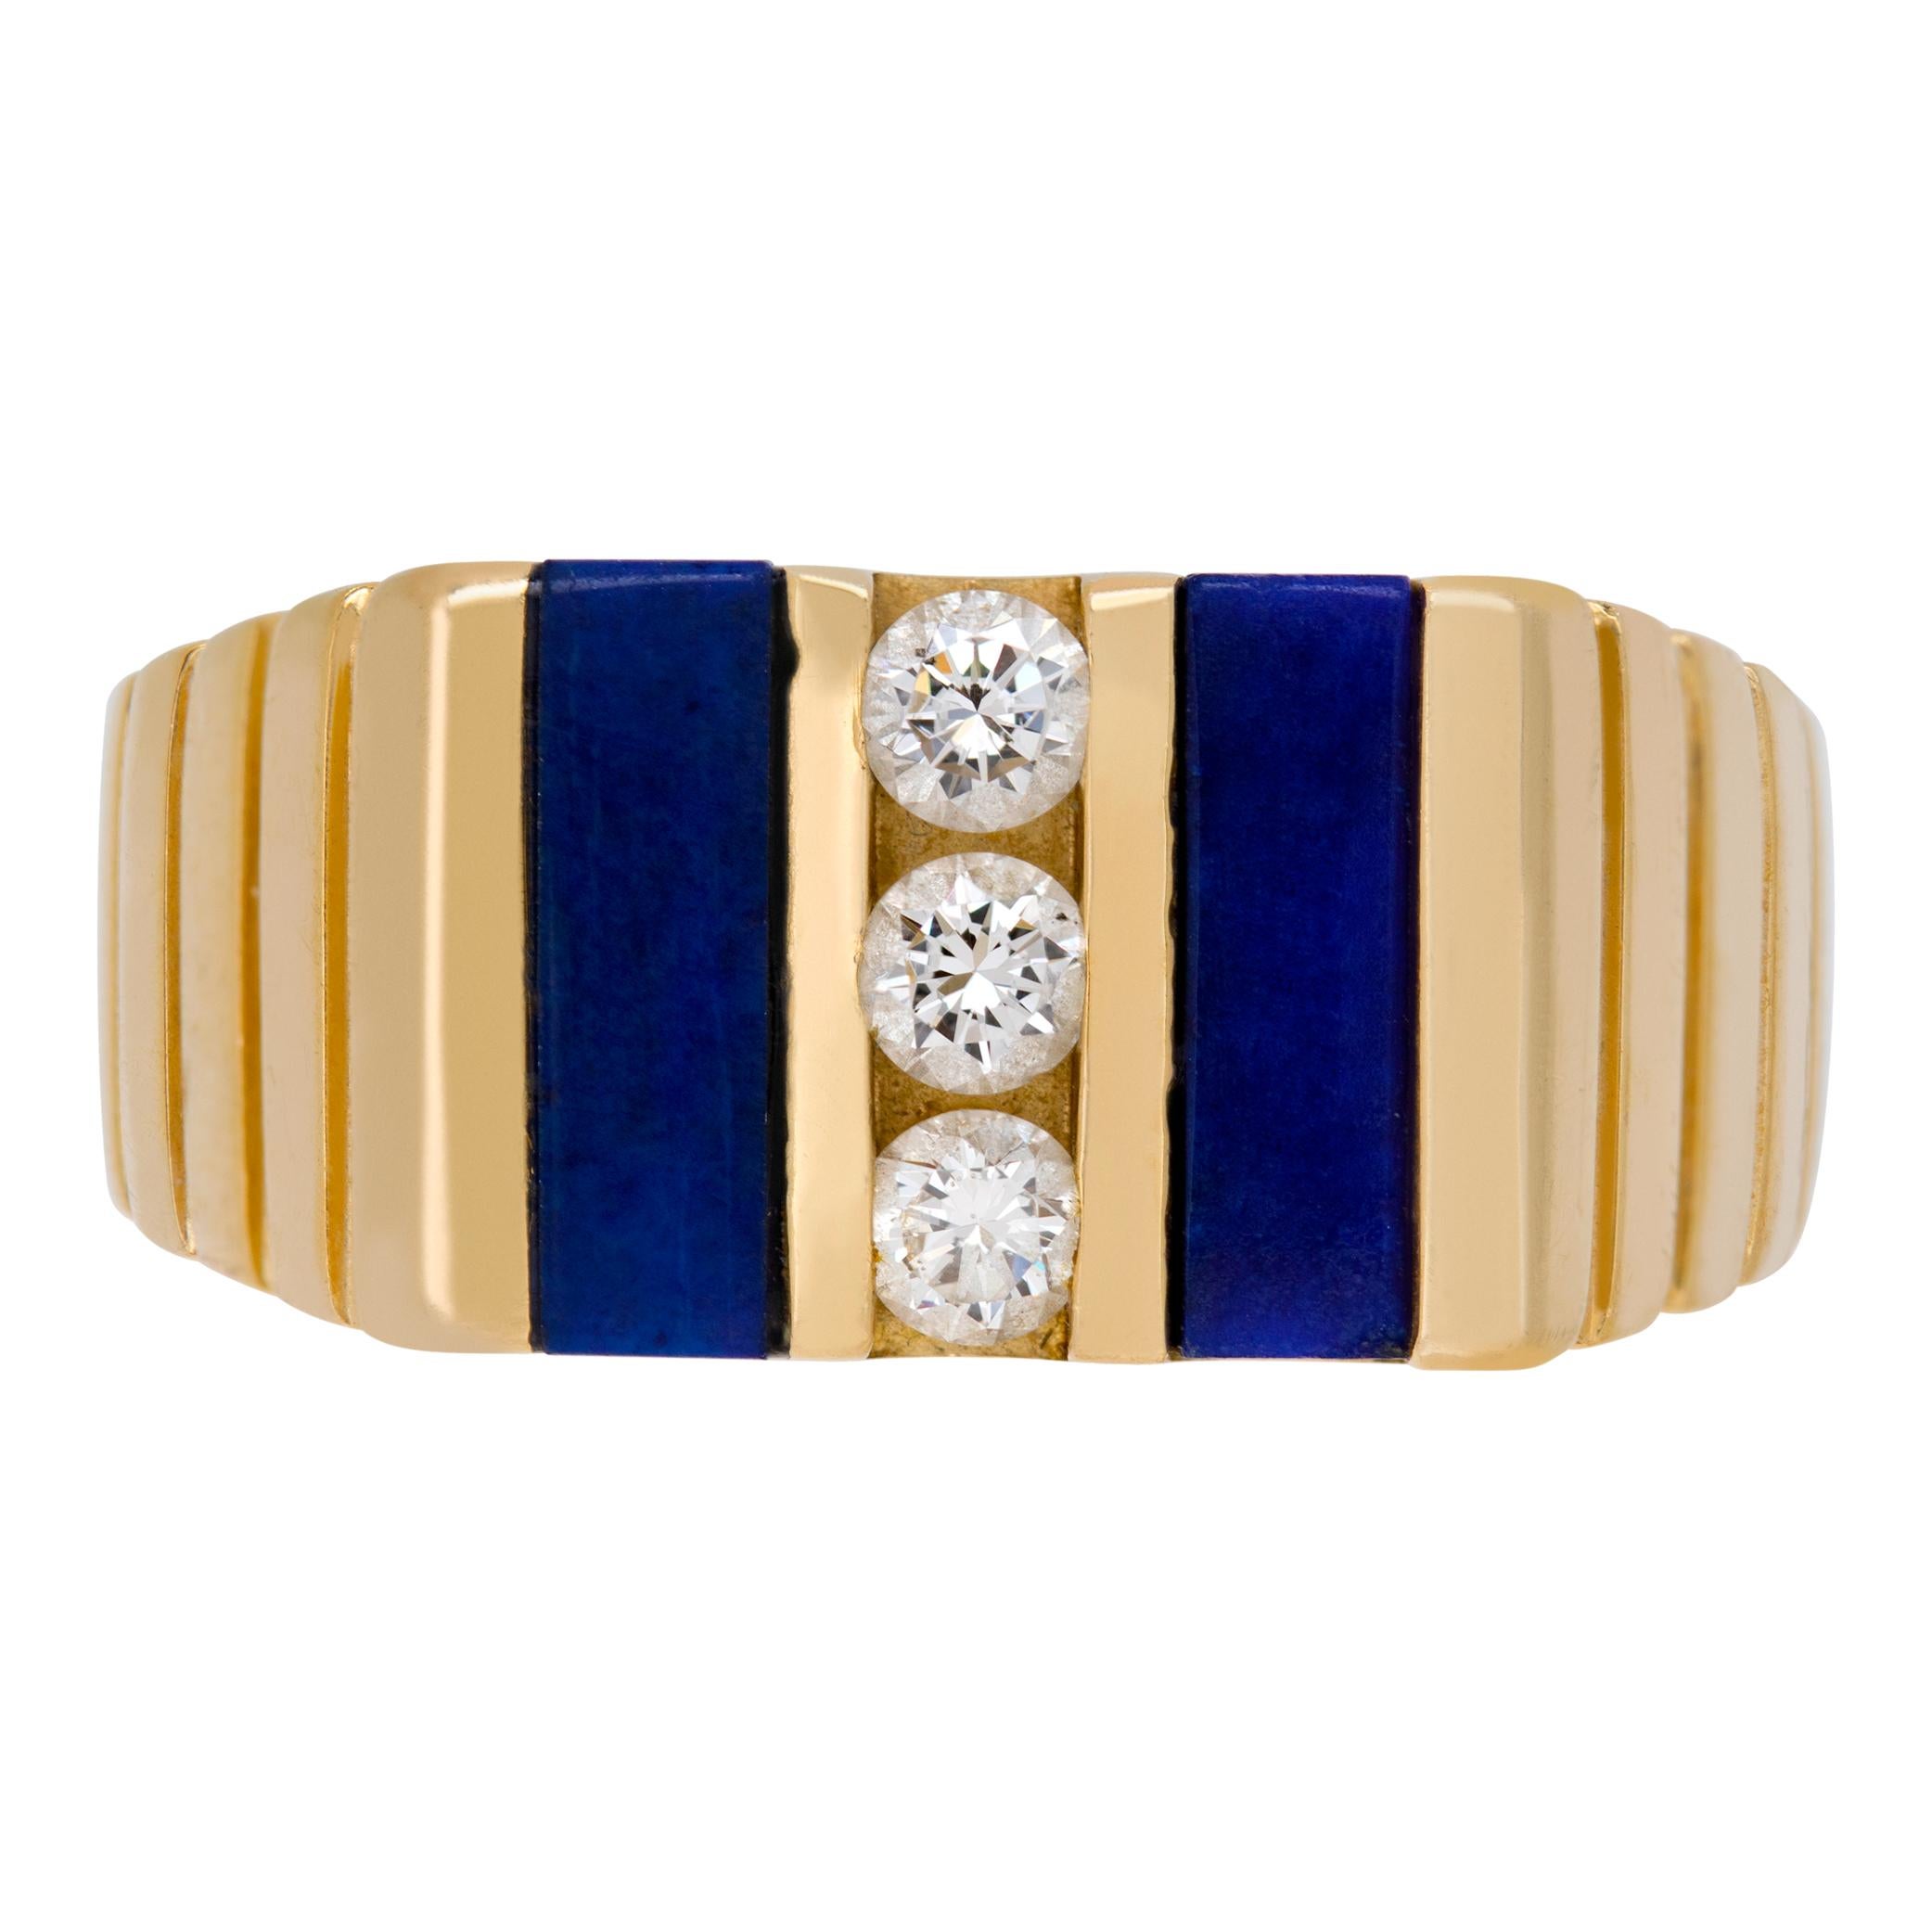 Ribbed 14k yellow gold ring with approximately 0.30 carat in channel set diamonds & bilateral lapiz lazuli accents. Size 9, measures 10mm thick.This Diamond ring is currently size 9 and some items can be sized up or down, please ask! It weighs 6.7